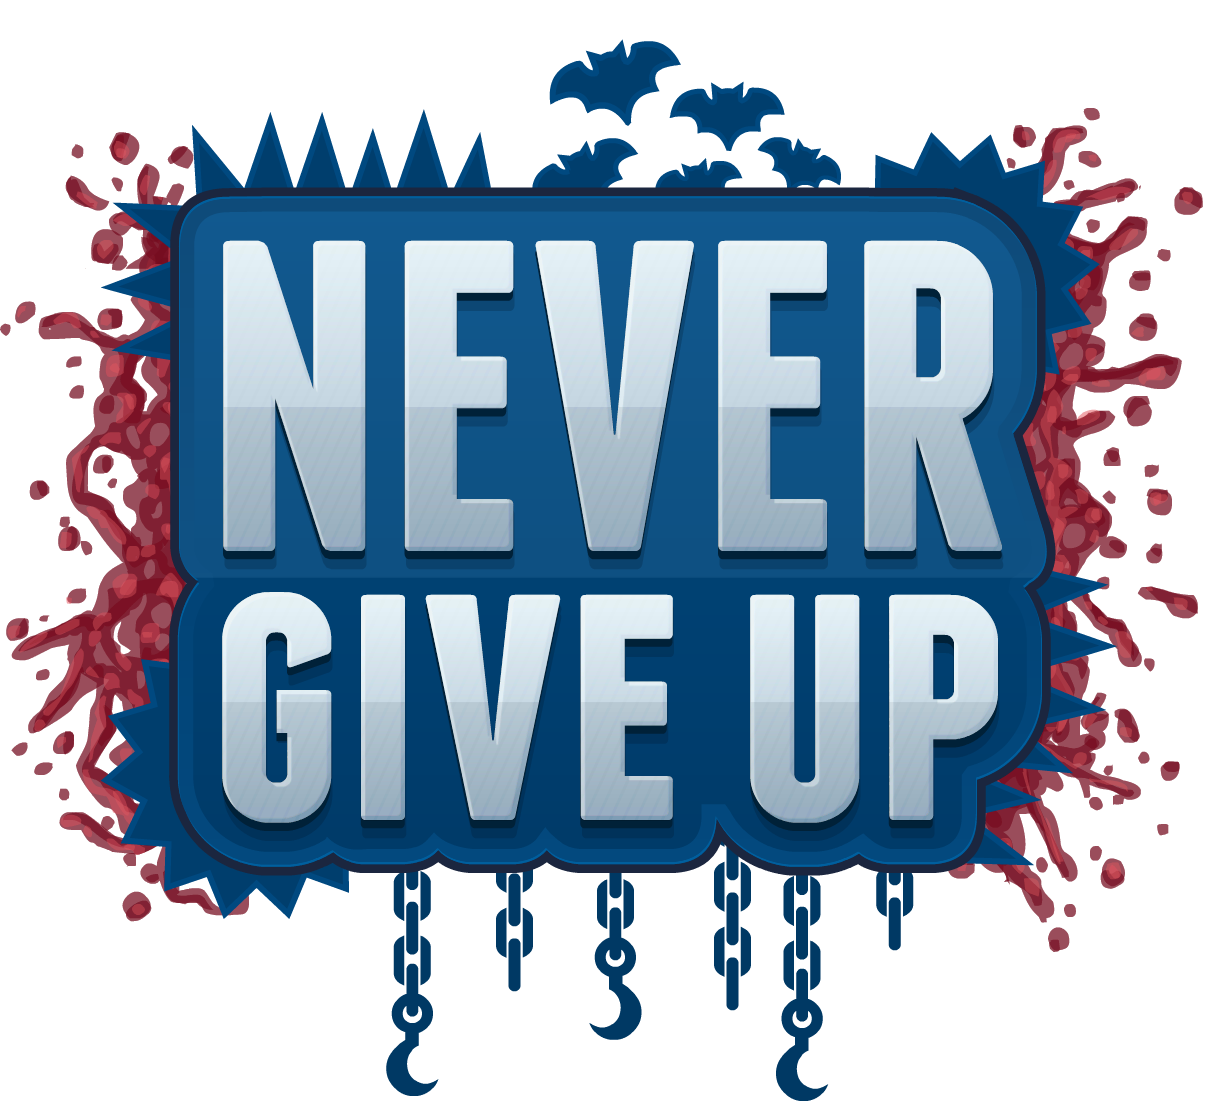 Text: Never give Up by Kataah